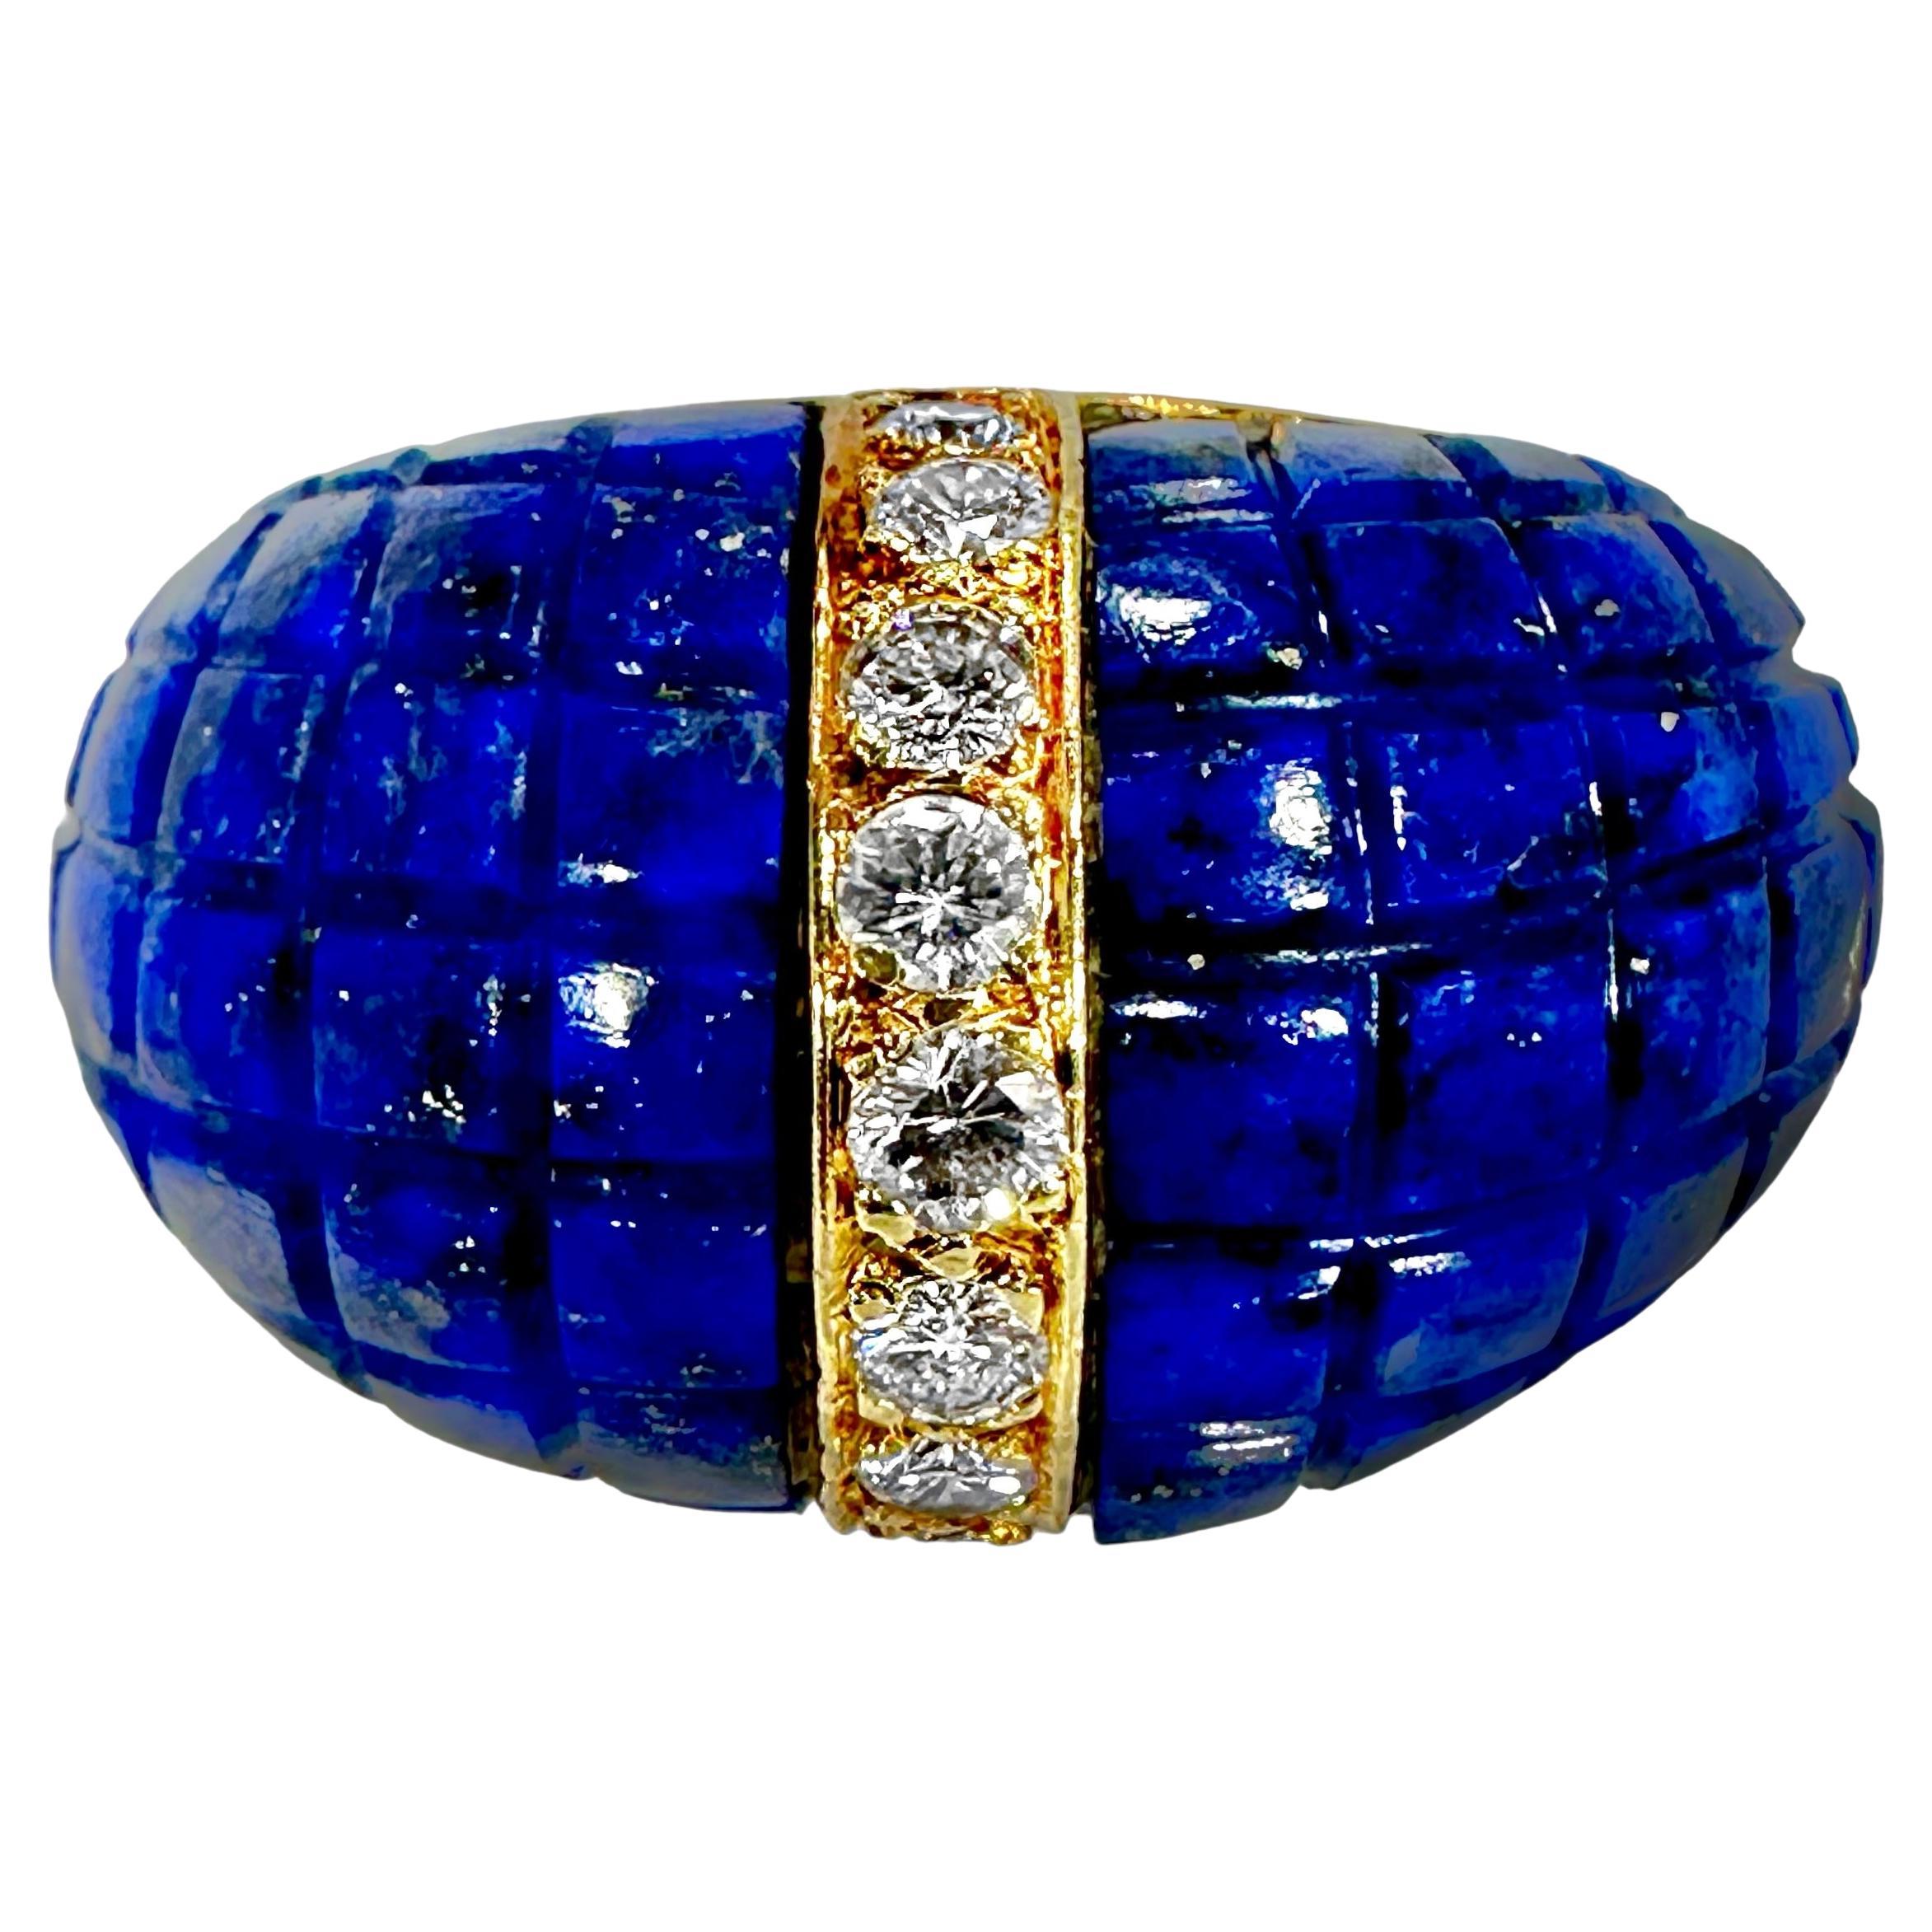 Exquisitely Crafted Italian 18K Yellow Gold, Lapis Lazuli, and Diamond Ring For Sale